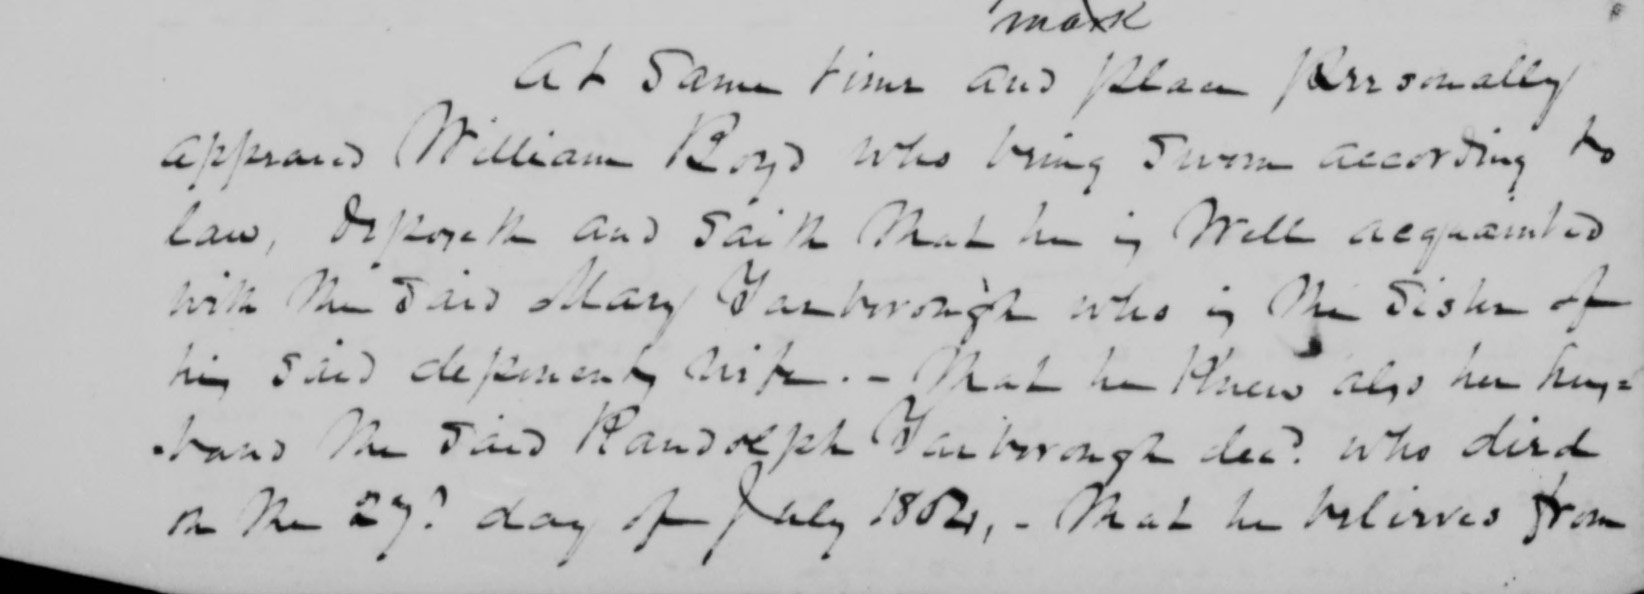 Affidavit of William Boyd in support of a Pension Claim for Mary Yarborough, 8 July 1839, page 1